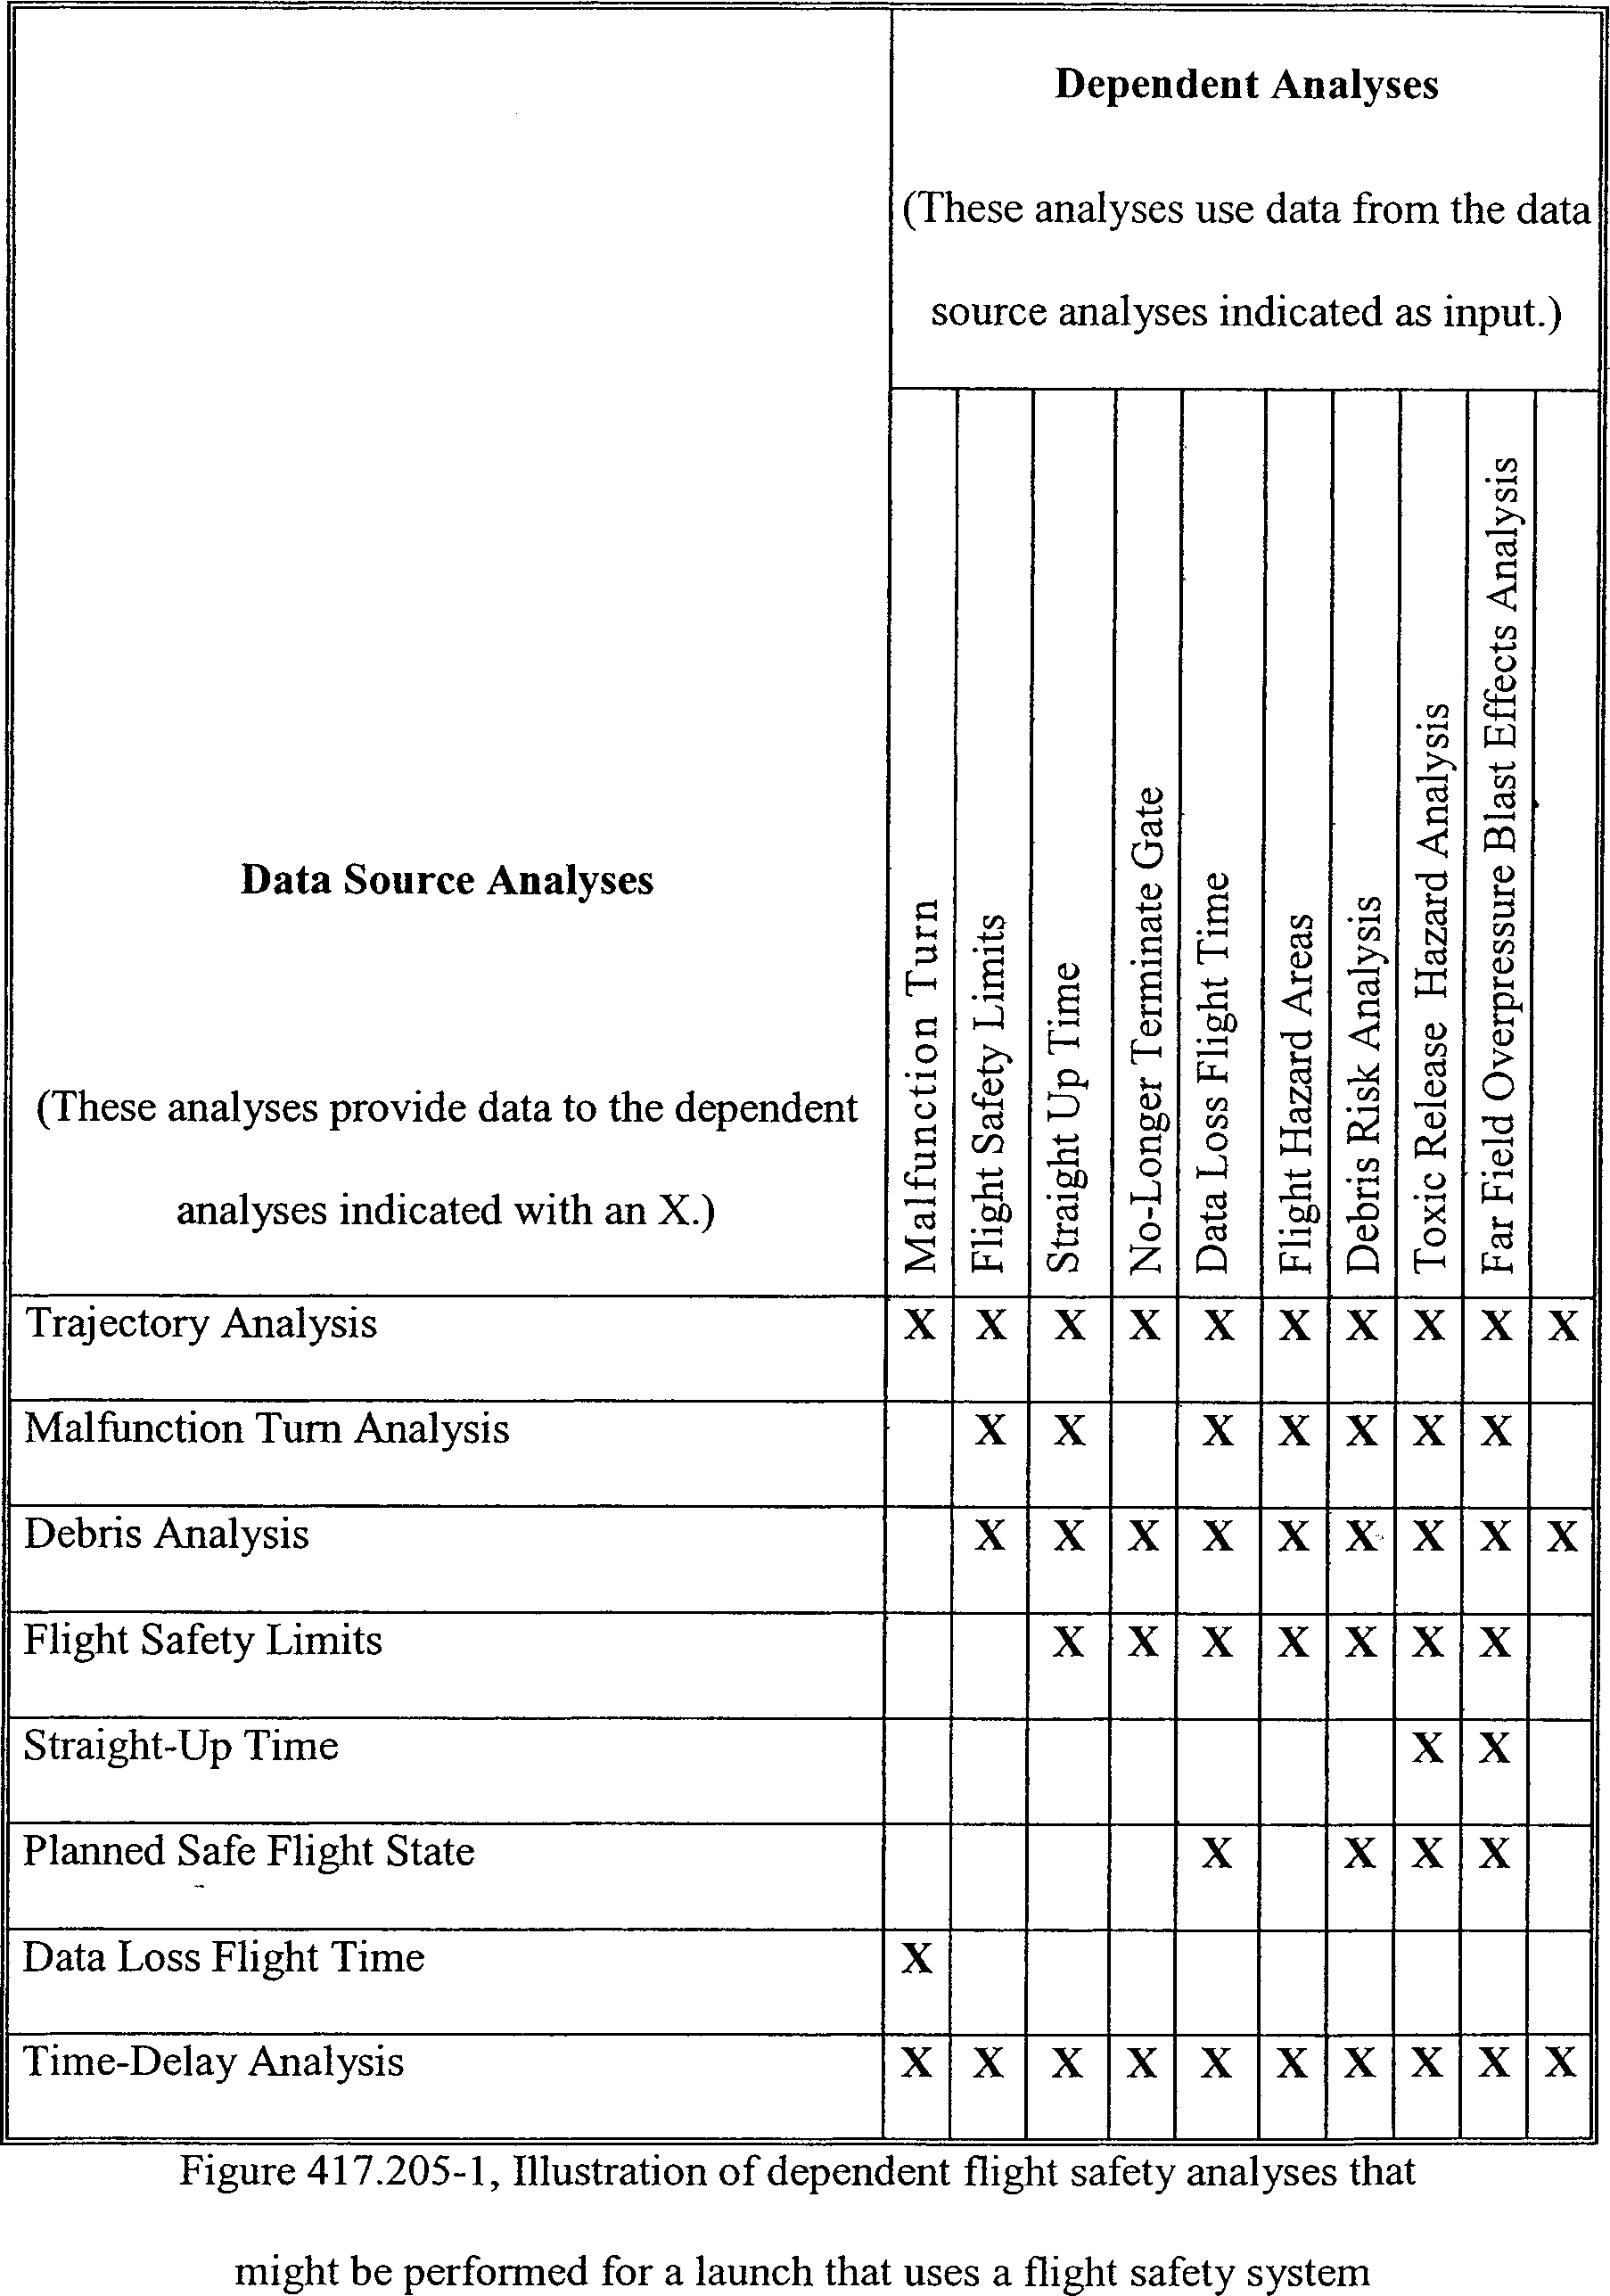 Graphic of (b) Dependent analyses. Because some analyses required by this subpart are inherently dependent on one another, the data output of any one analysis must be compatible in form and content with the data input requirements of any other analysis that depends on that output. Figure 417.205-1 illustrates the flight safety analyses that might be performed for a launch flown with a flight safety system and the typical dependencies that might exist among the analyses.